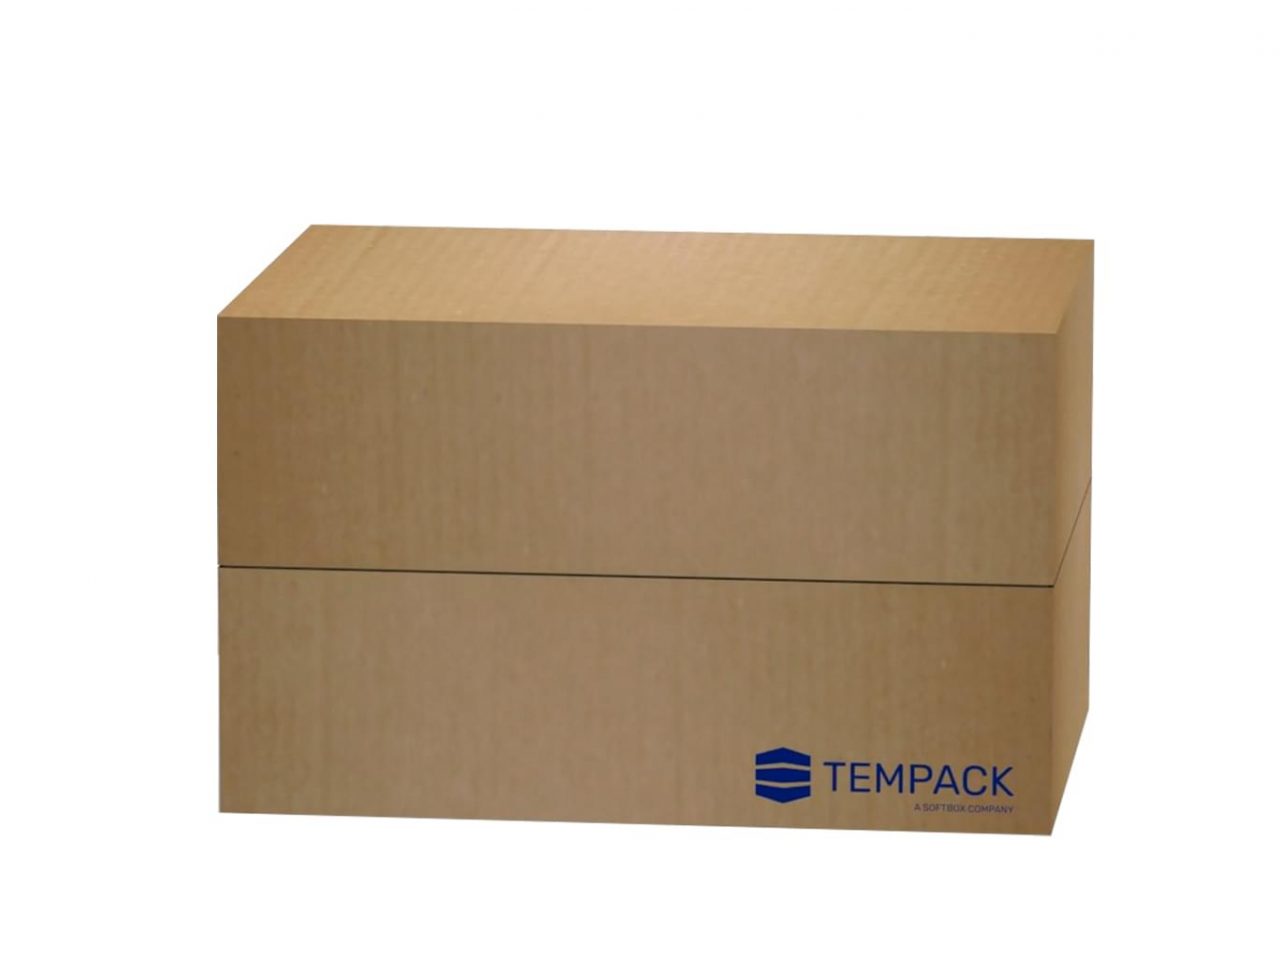 tempack-prequalified-solution-pallet-shipper-72-1@2x-1280x958